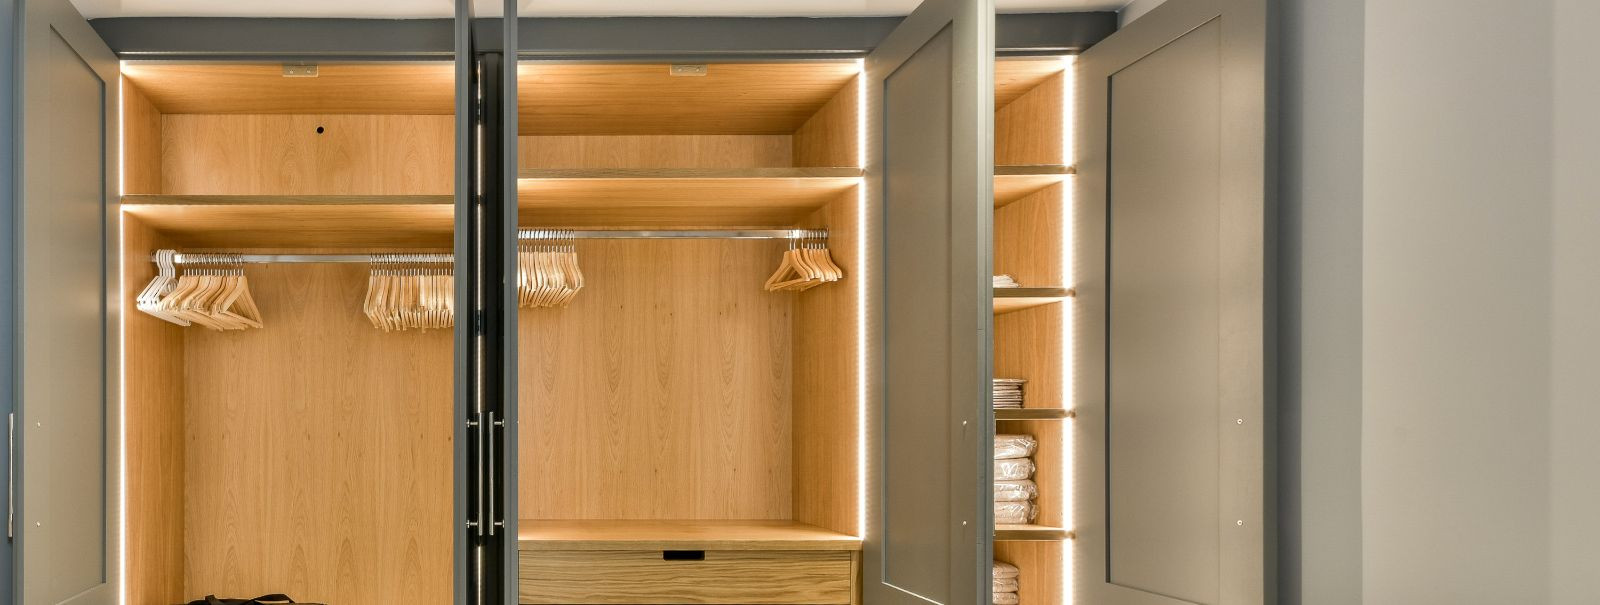 Custom wardrobe design is not just about creating a space to store your clothes; it's about crafting a personalized storage solution that aligns with your lifes